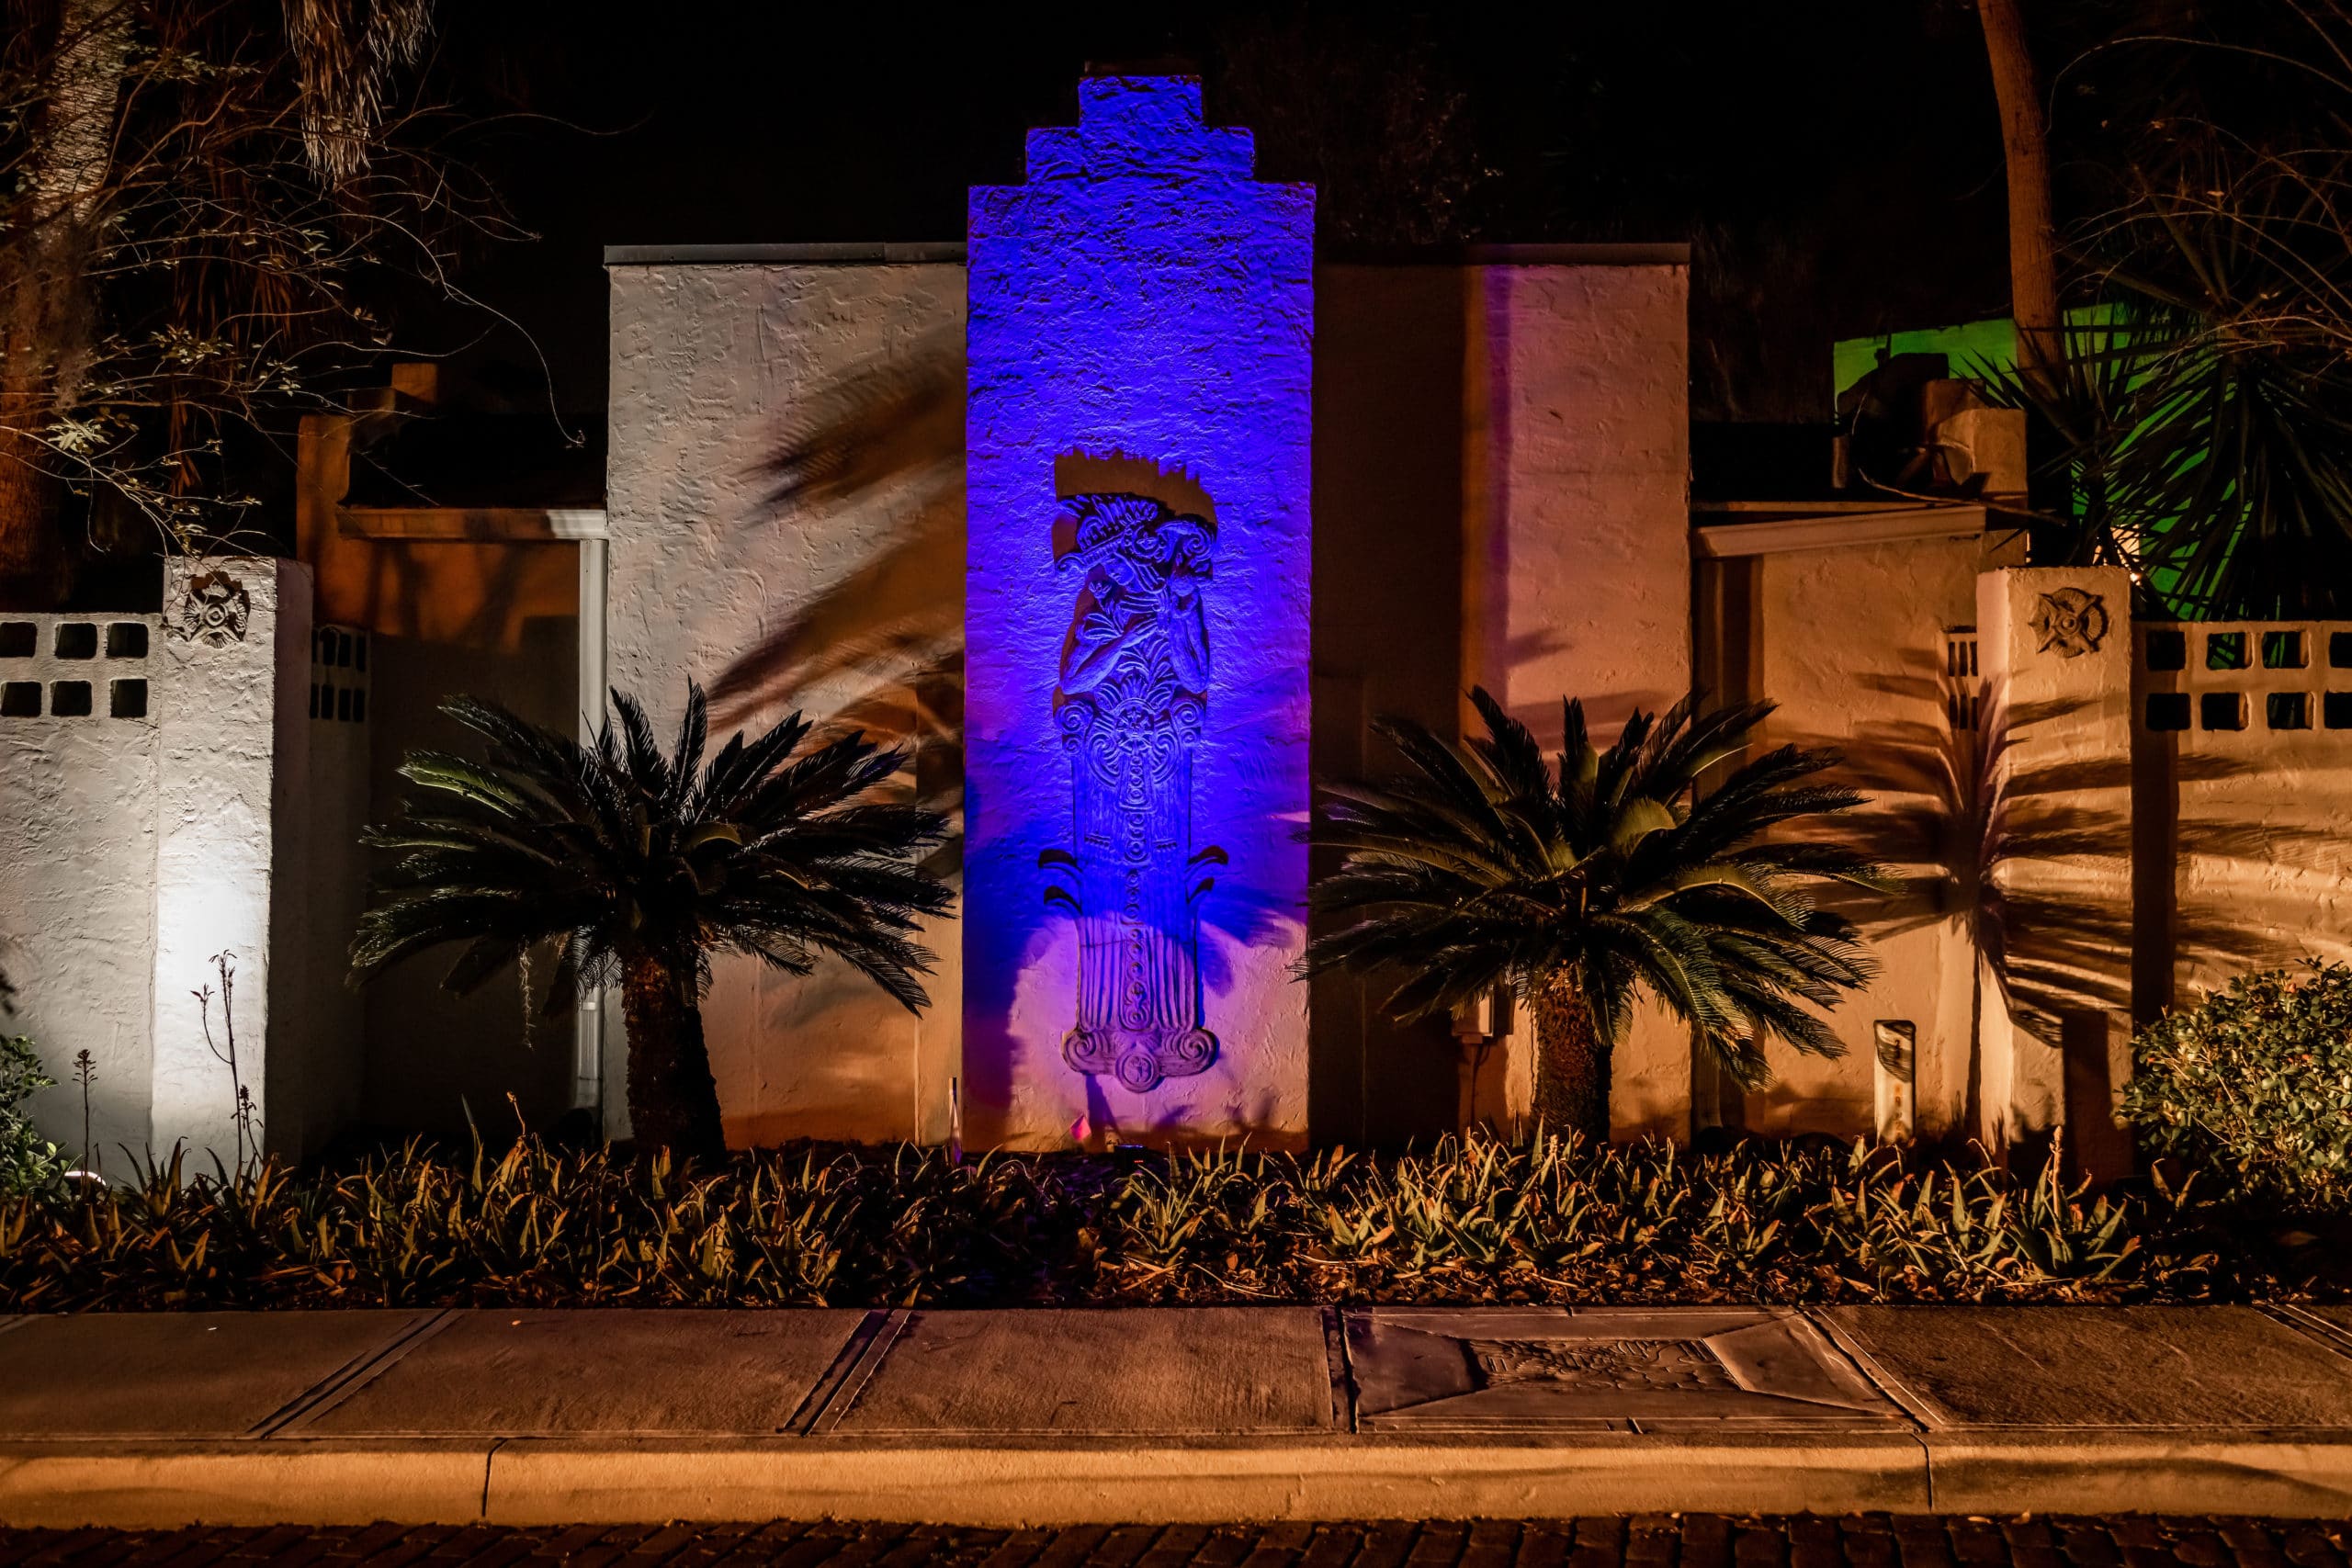 The outside of an A&H building with a large concrete relief sculpture of a person, imaginatively dressed in a complex costume reminiscent of old Mayan illustrations, dramatically and colorfully lit in the night.